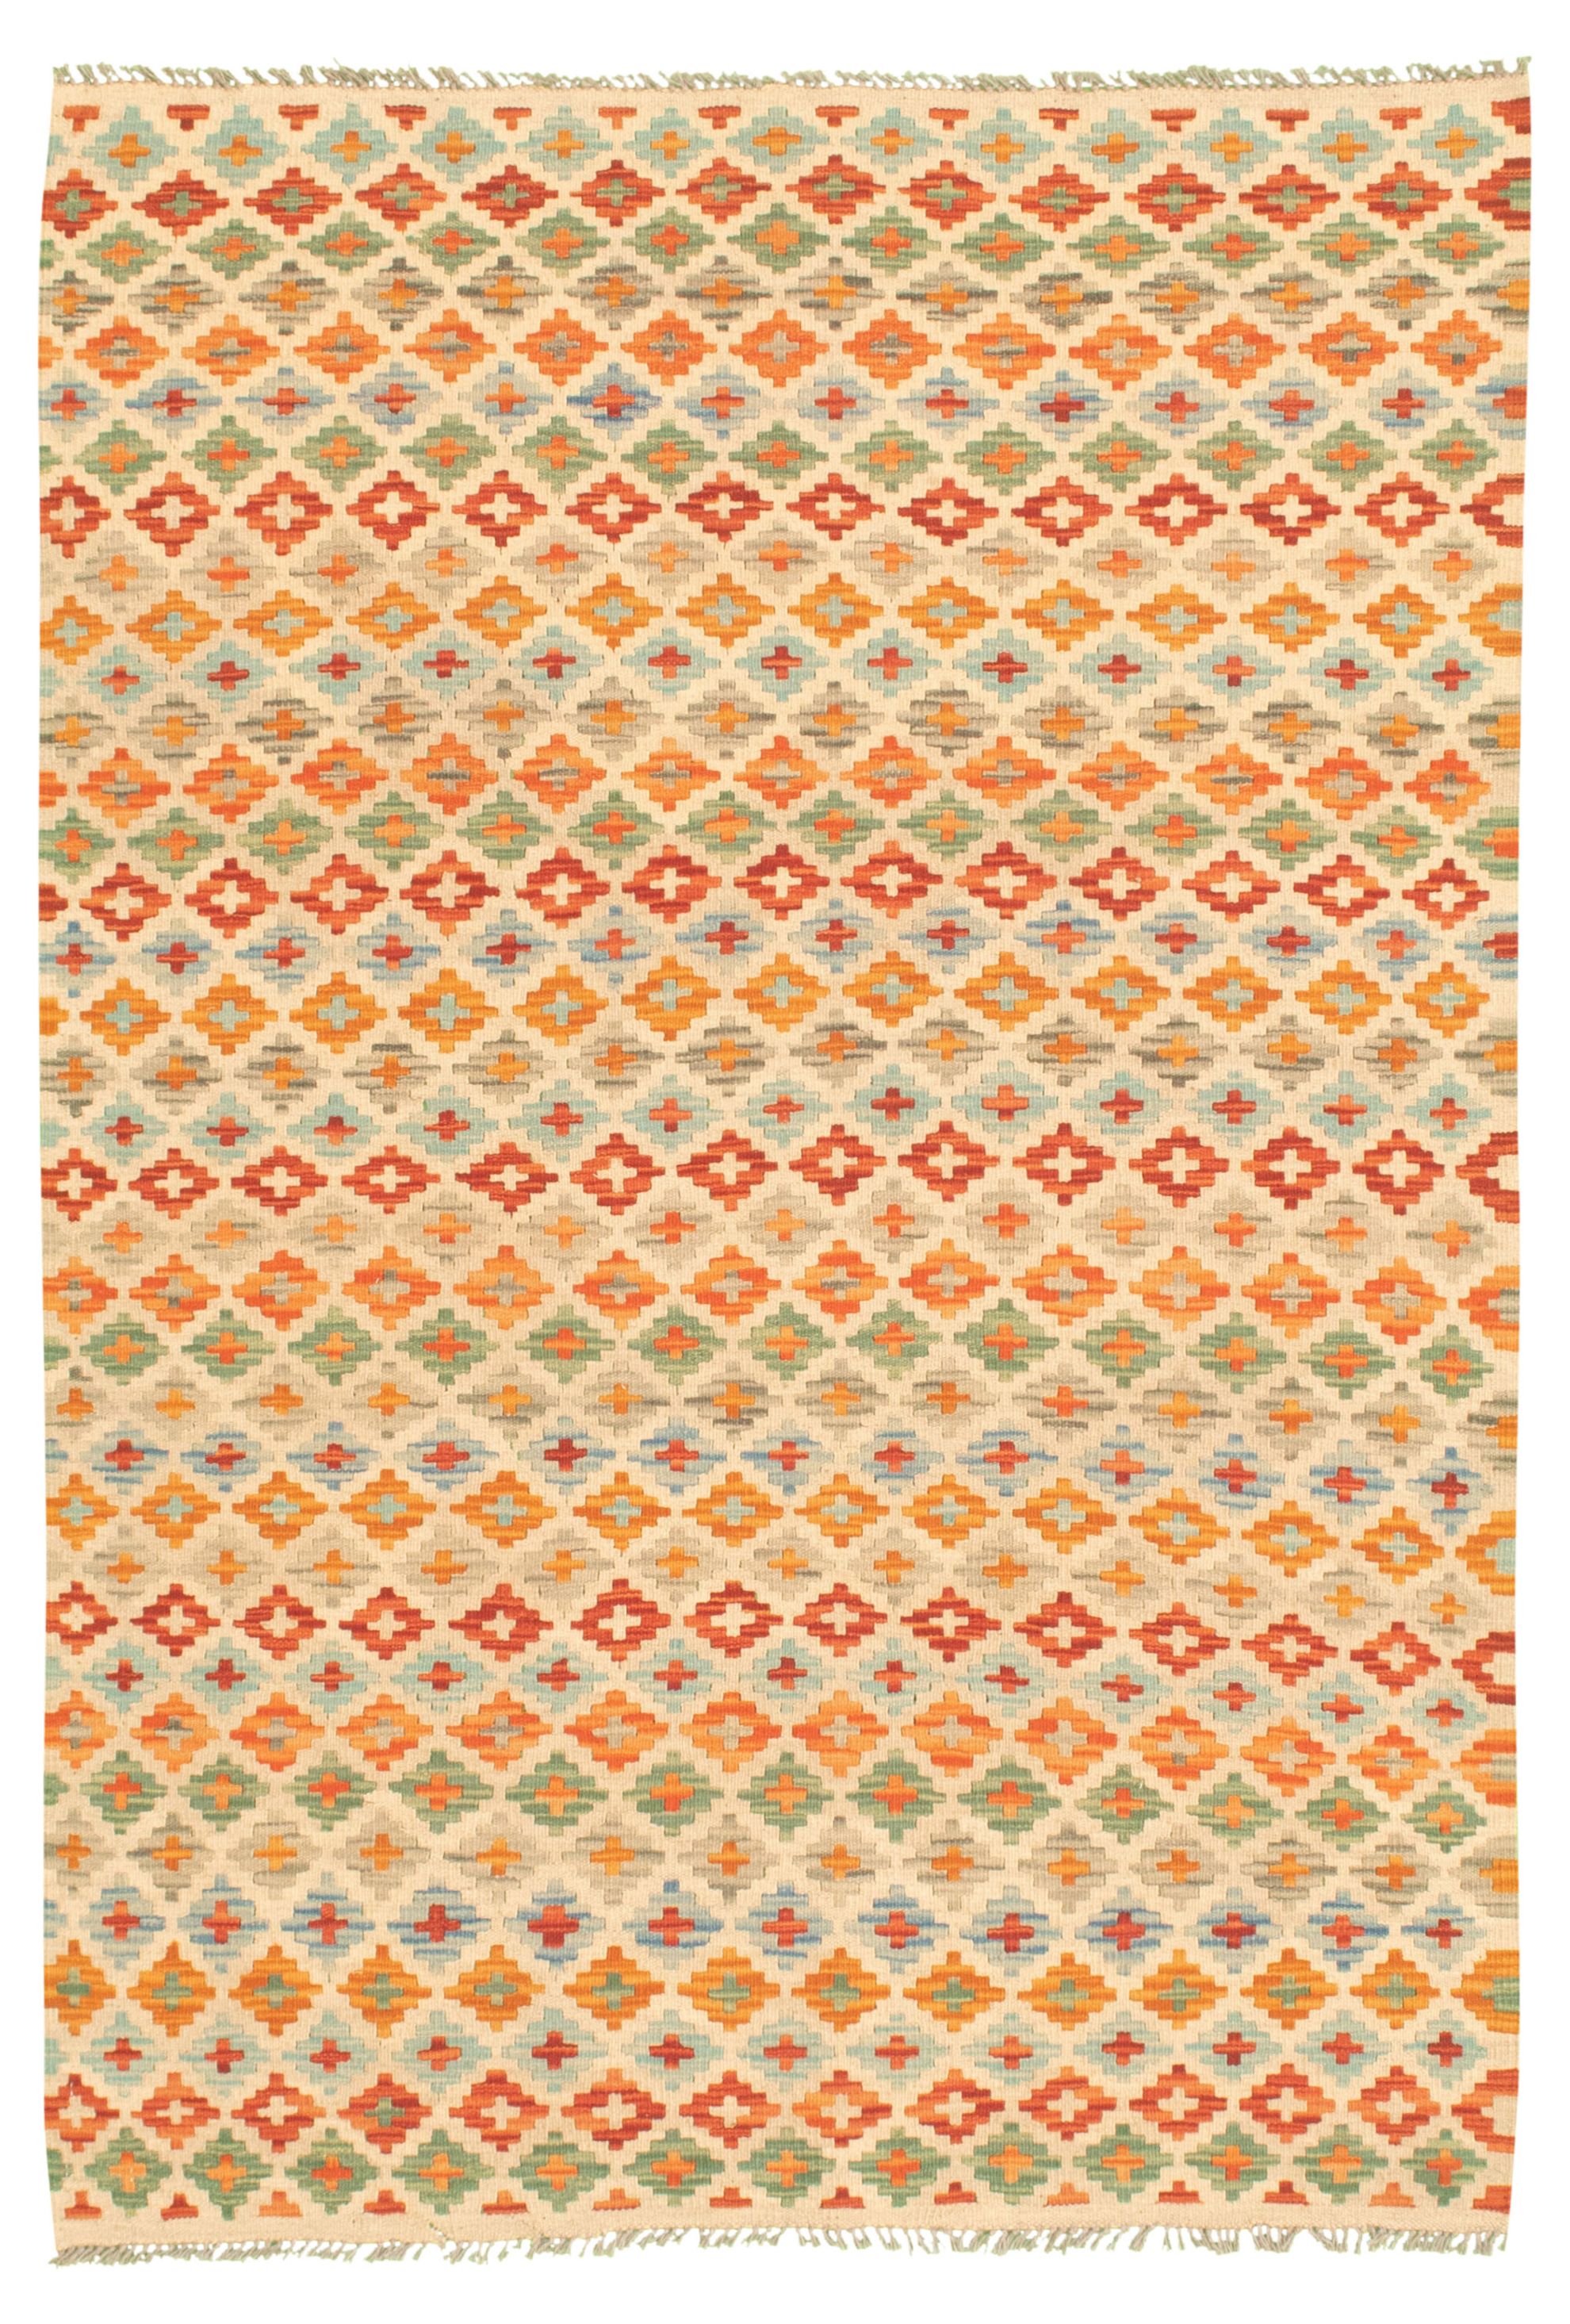 Hand woven Bold and Colorful  Cream Wool Kilim 4'4" x 6'3"  Size: 4'4" x 6'3"  